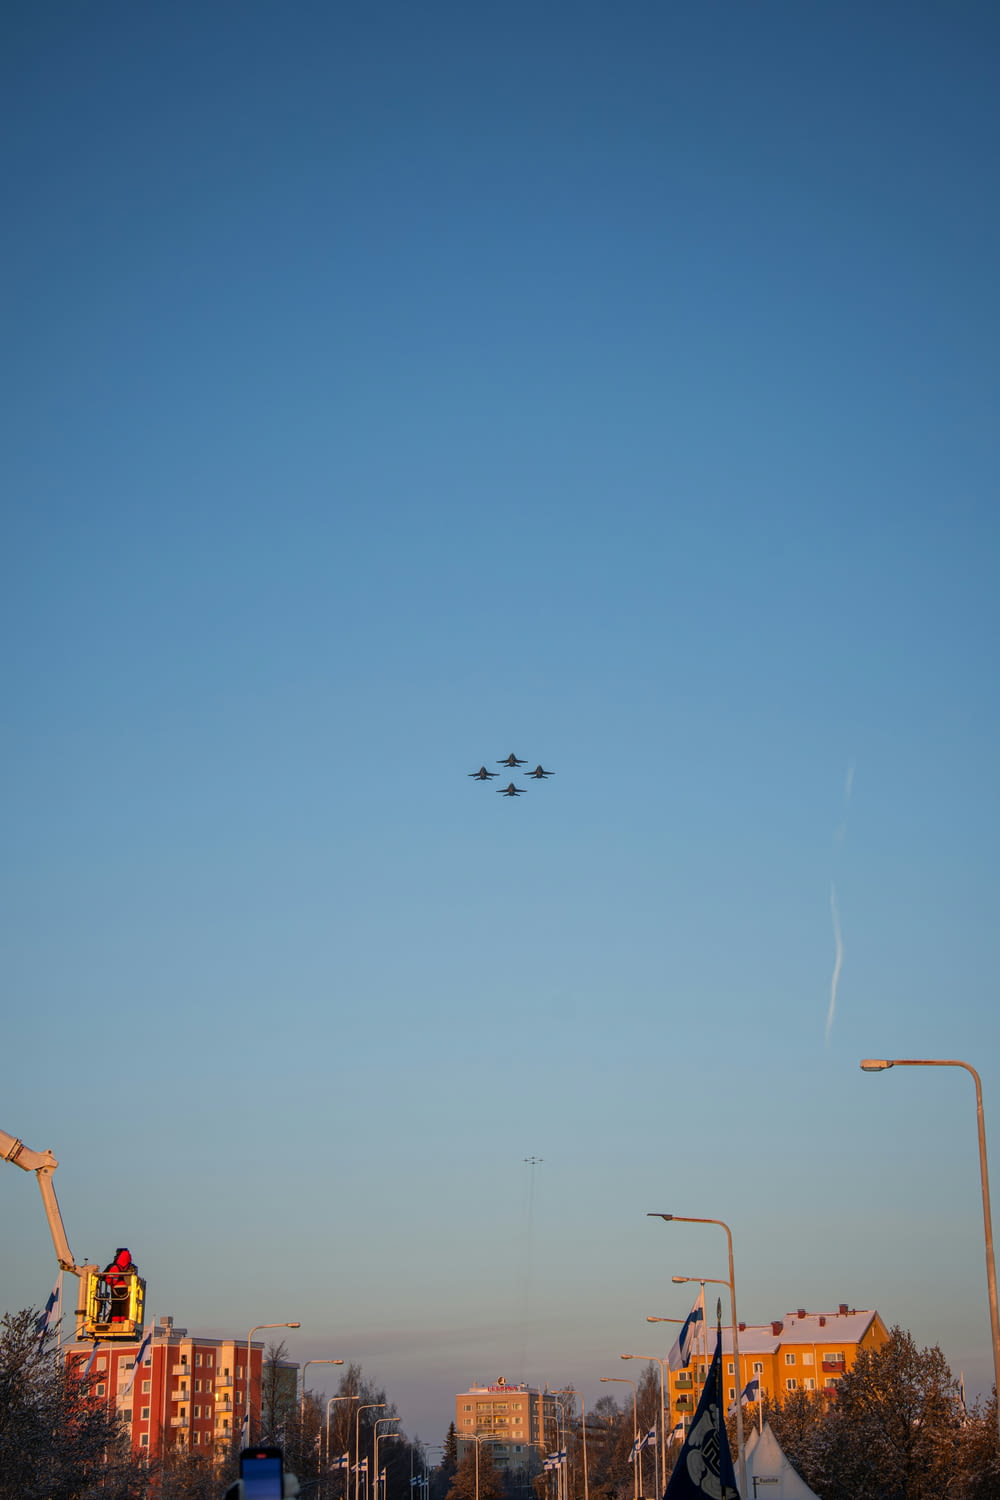 a group of airplanes flying over a city